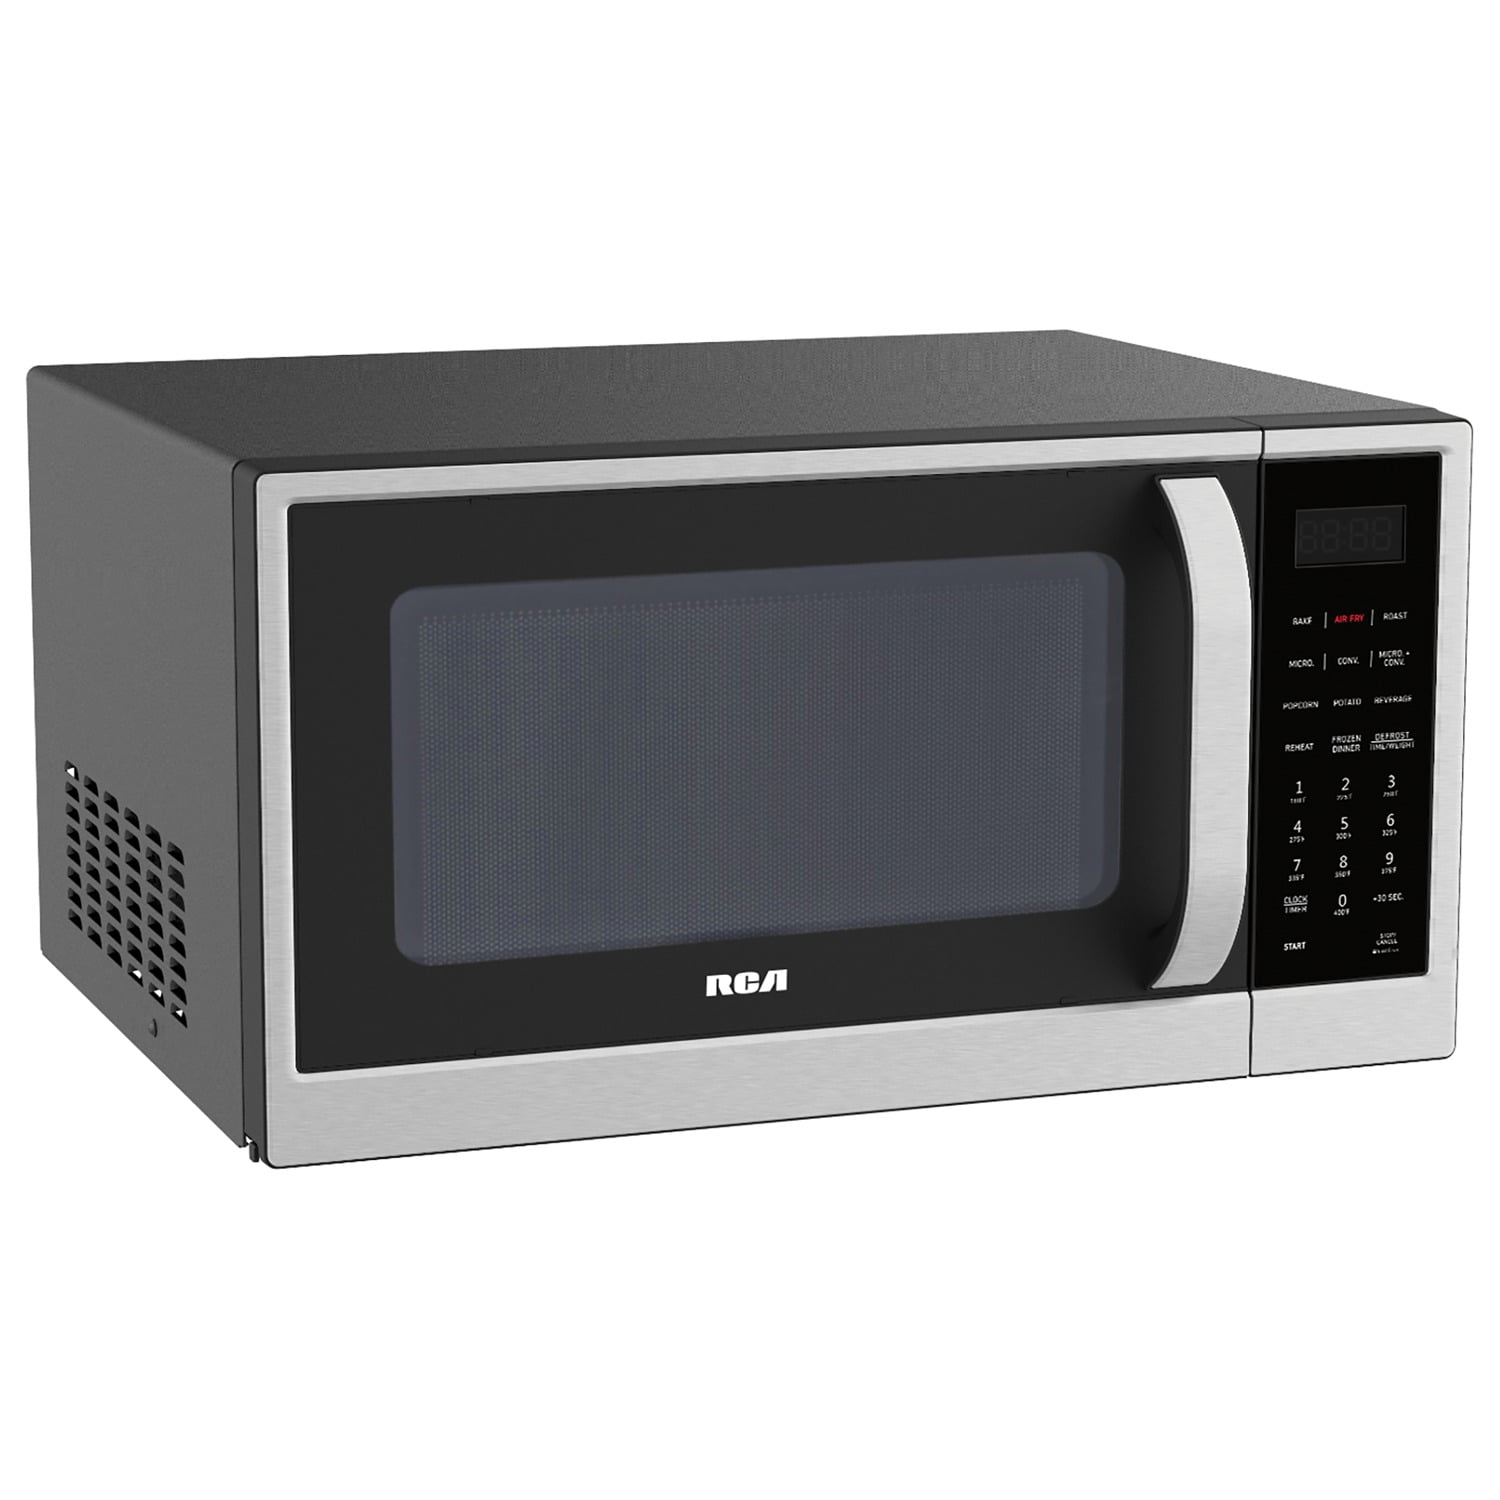  RCA RMW1220_AMZ 1.2 cu ft Microwave, Digital Air Fryer,  Convection Oven, Combo-Fry with XL Capacity, Stainless Steel Finish: Home &  Kitchen